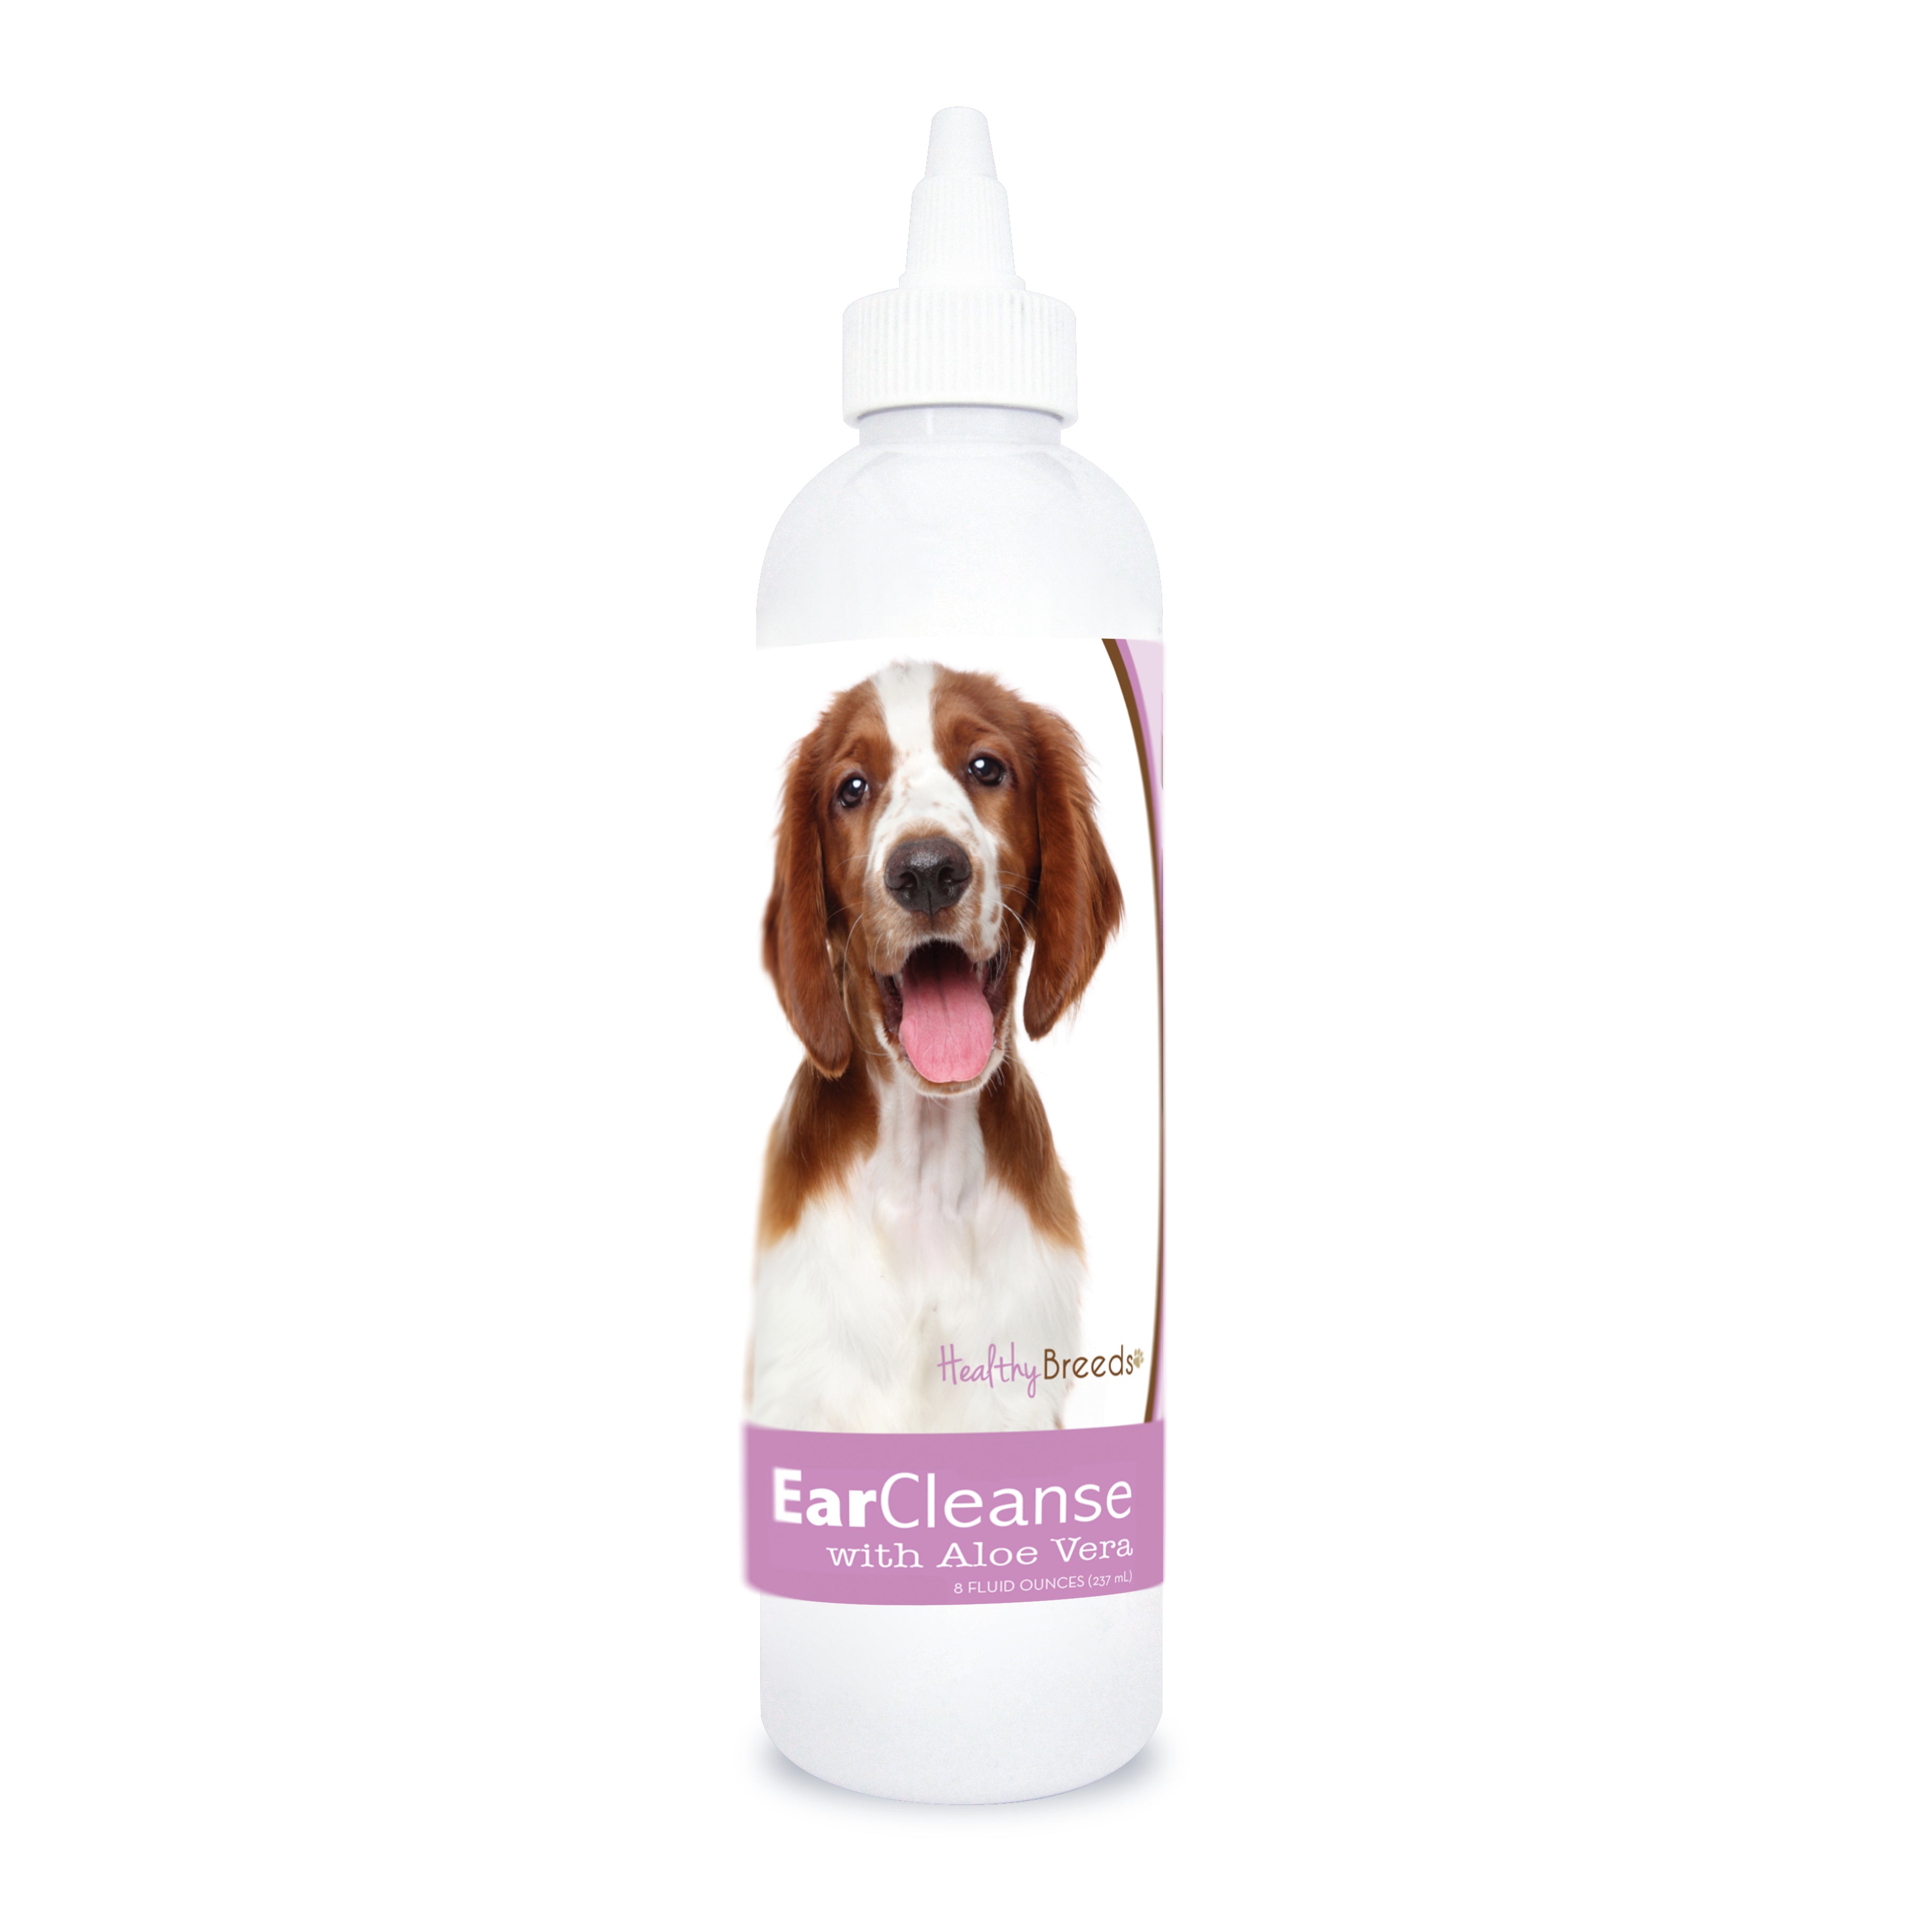 Welsh Springer Spaniel Ear Cleanse with Aloe Vera Sweet Pea and Vanilla 8 oz